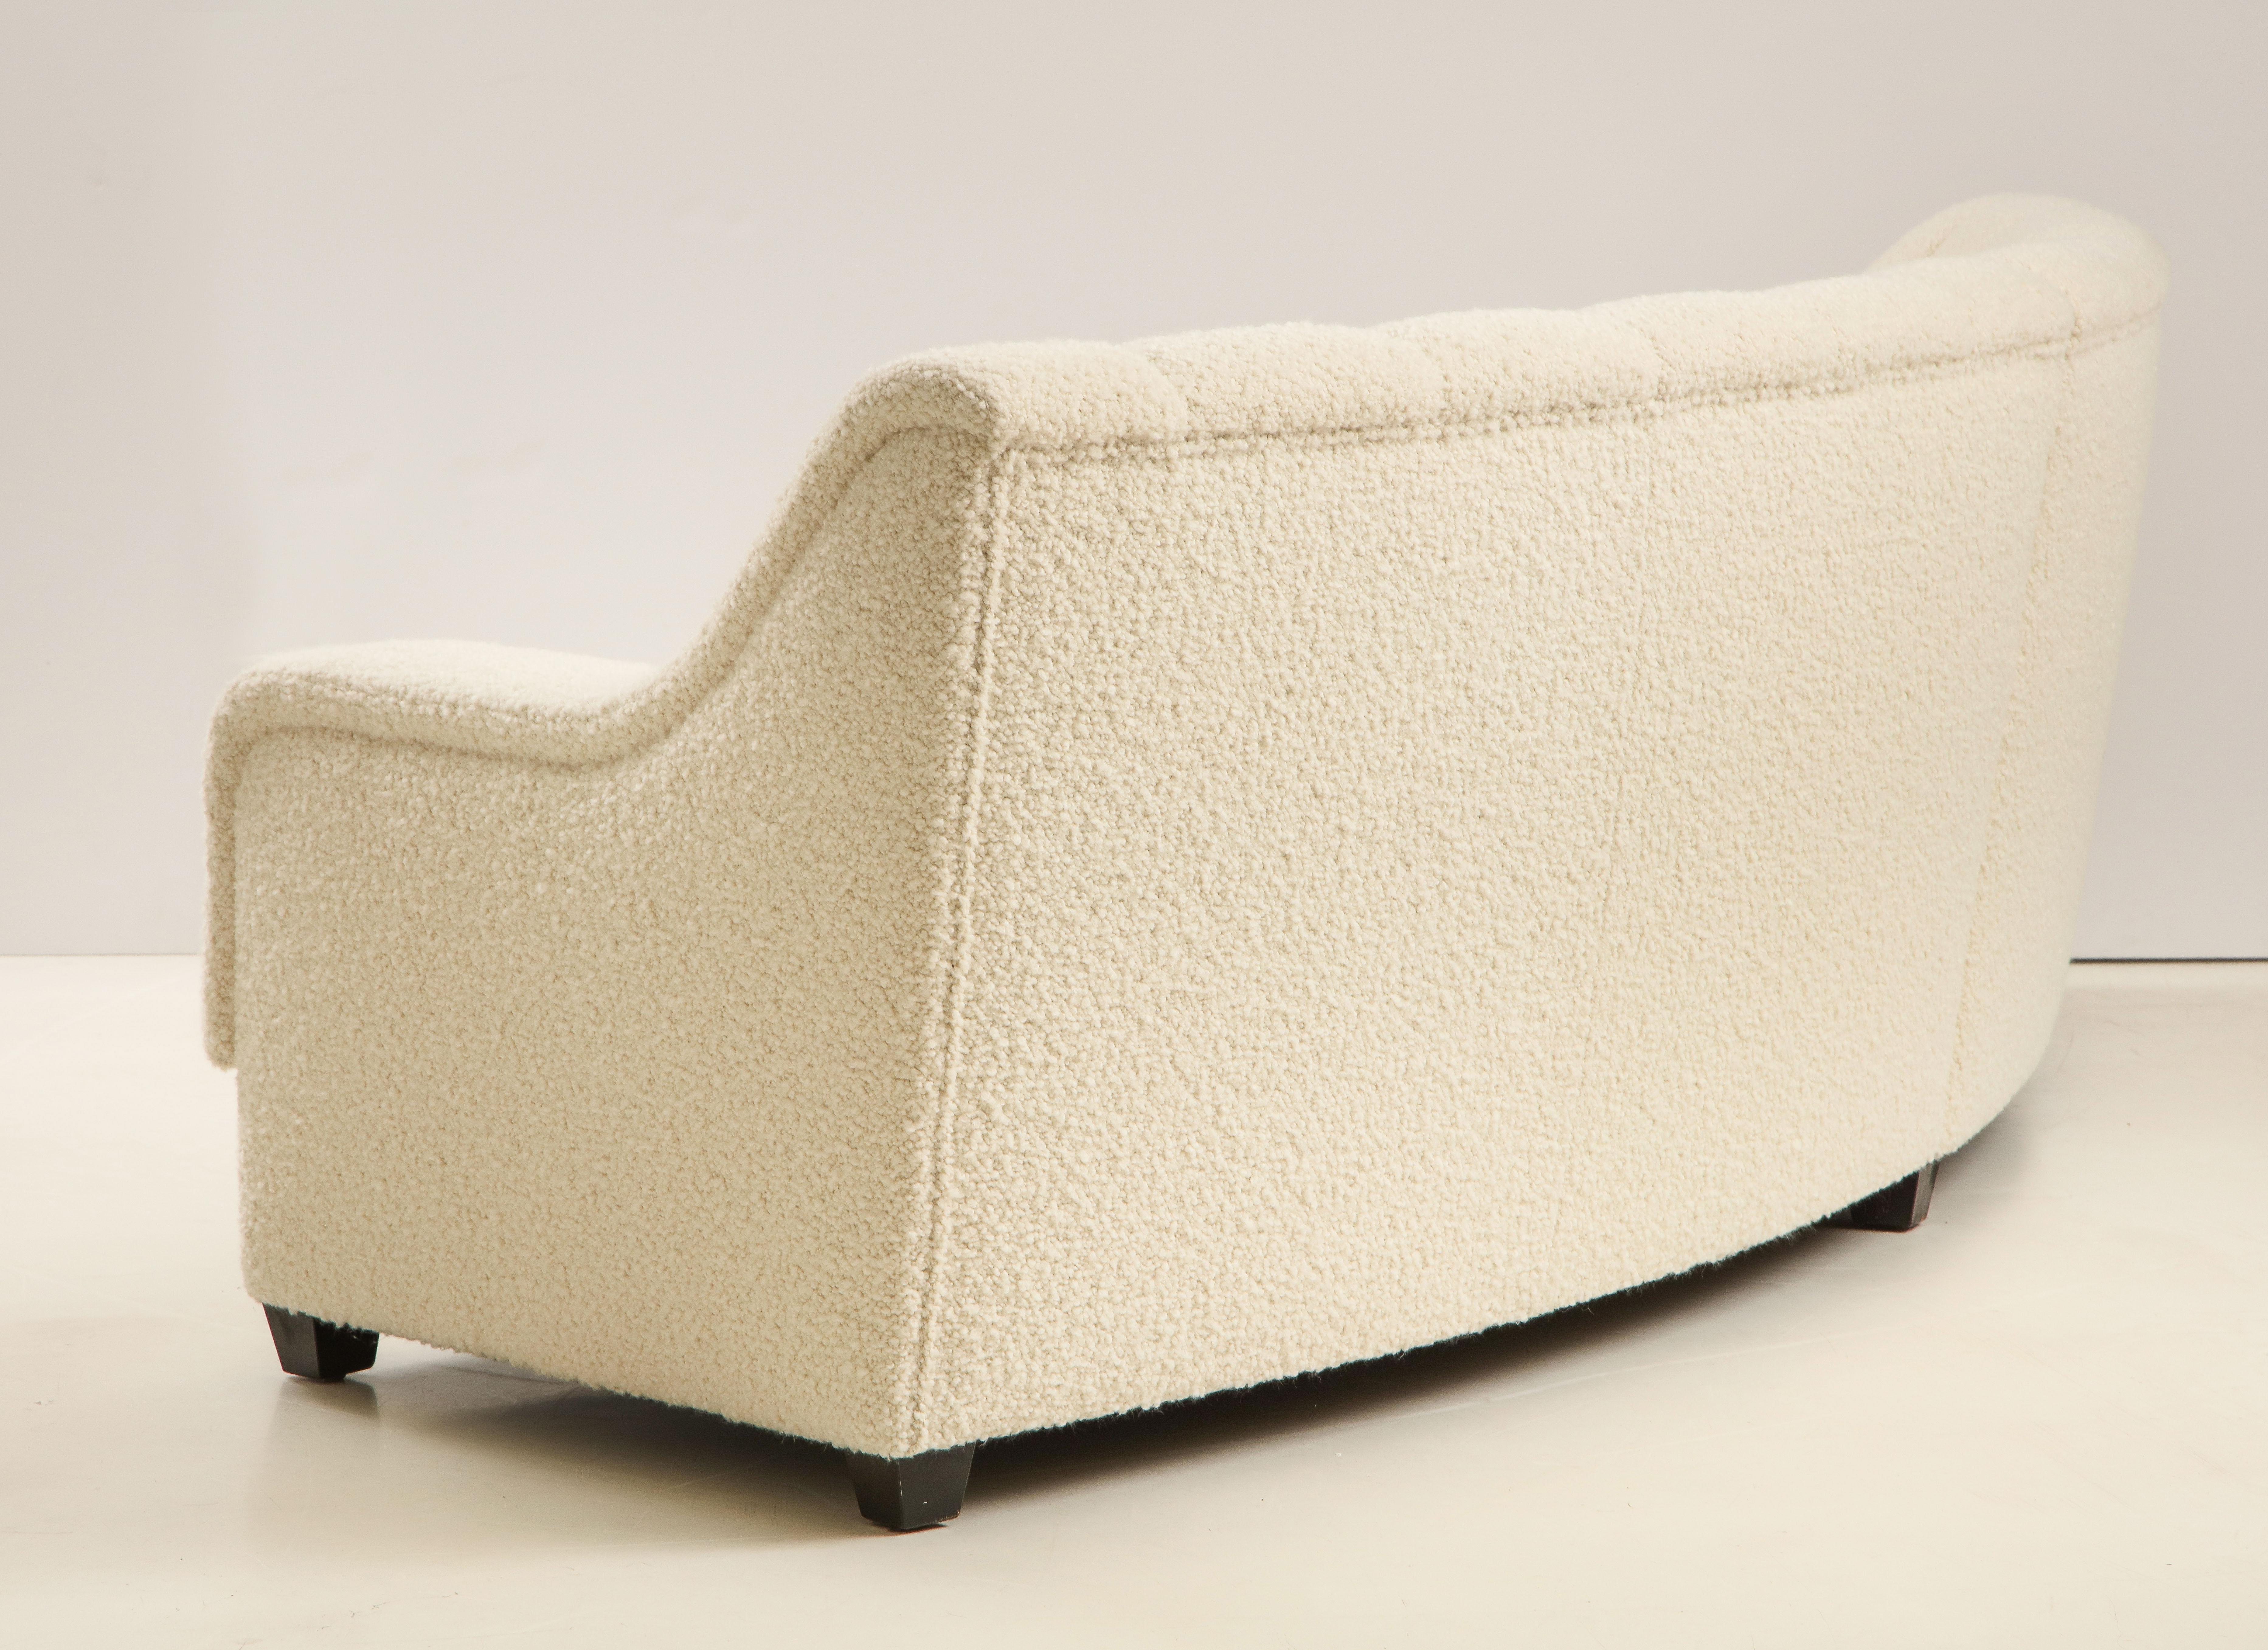 Segmented Curved Sofa in the Style of De Sede in Ivory Boucle, Italy 2